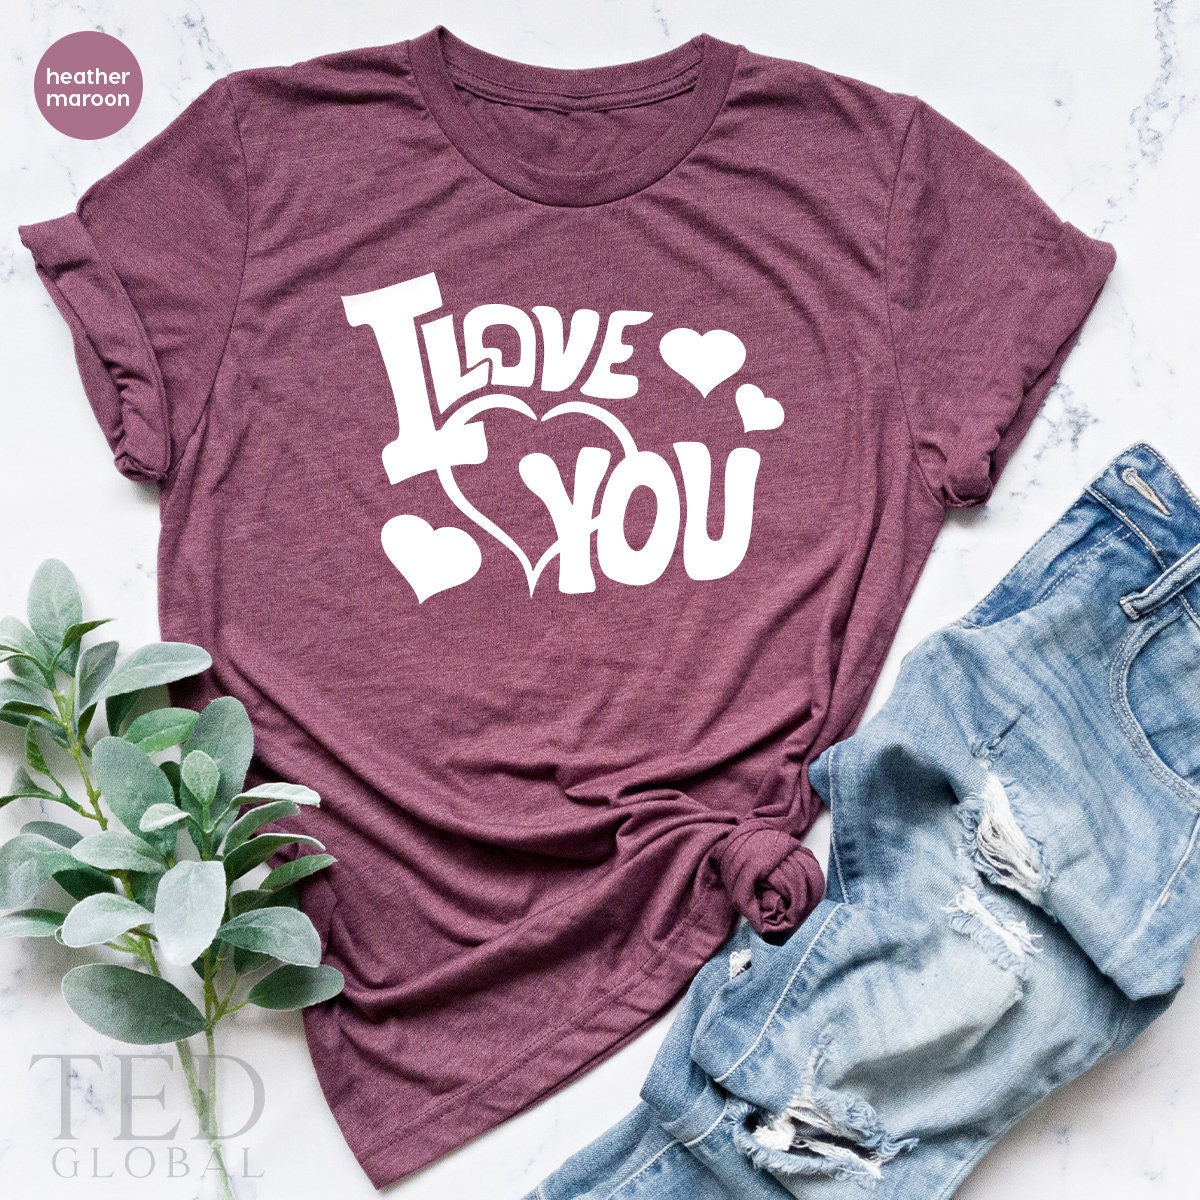 Personalized Couple Shirts, Girlfriend Shirt, I Love You T Shirt, Mothers Day Shirt, Valentines Day TShirt, Shirt For Women - Fastdeliverytees.com